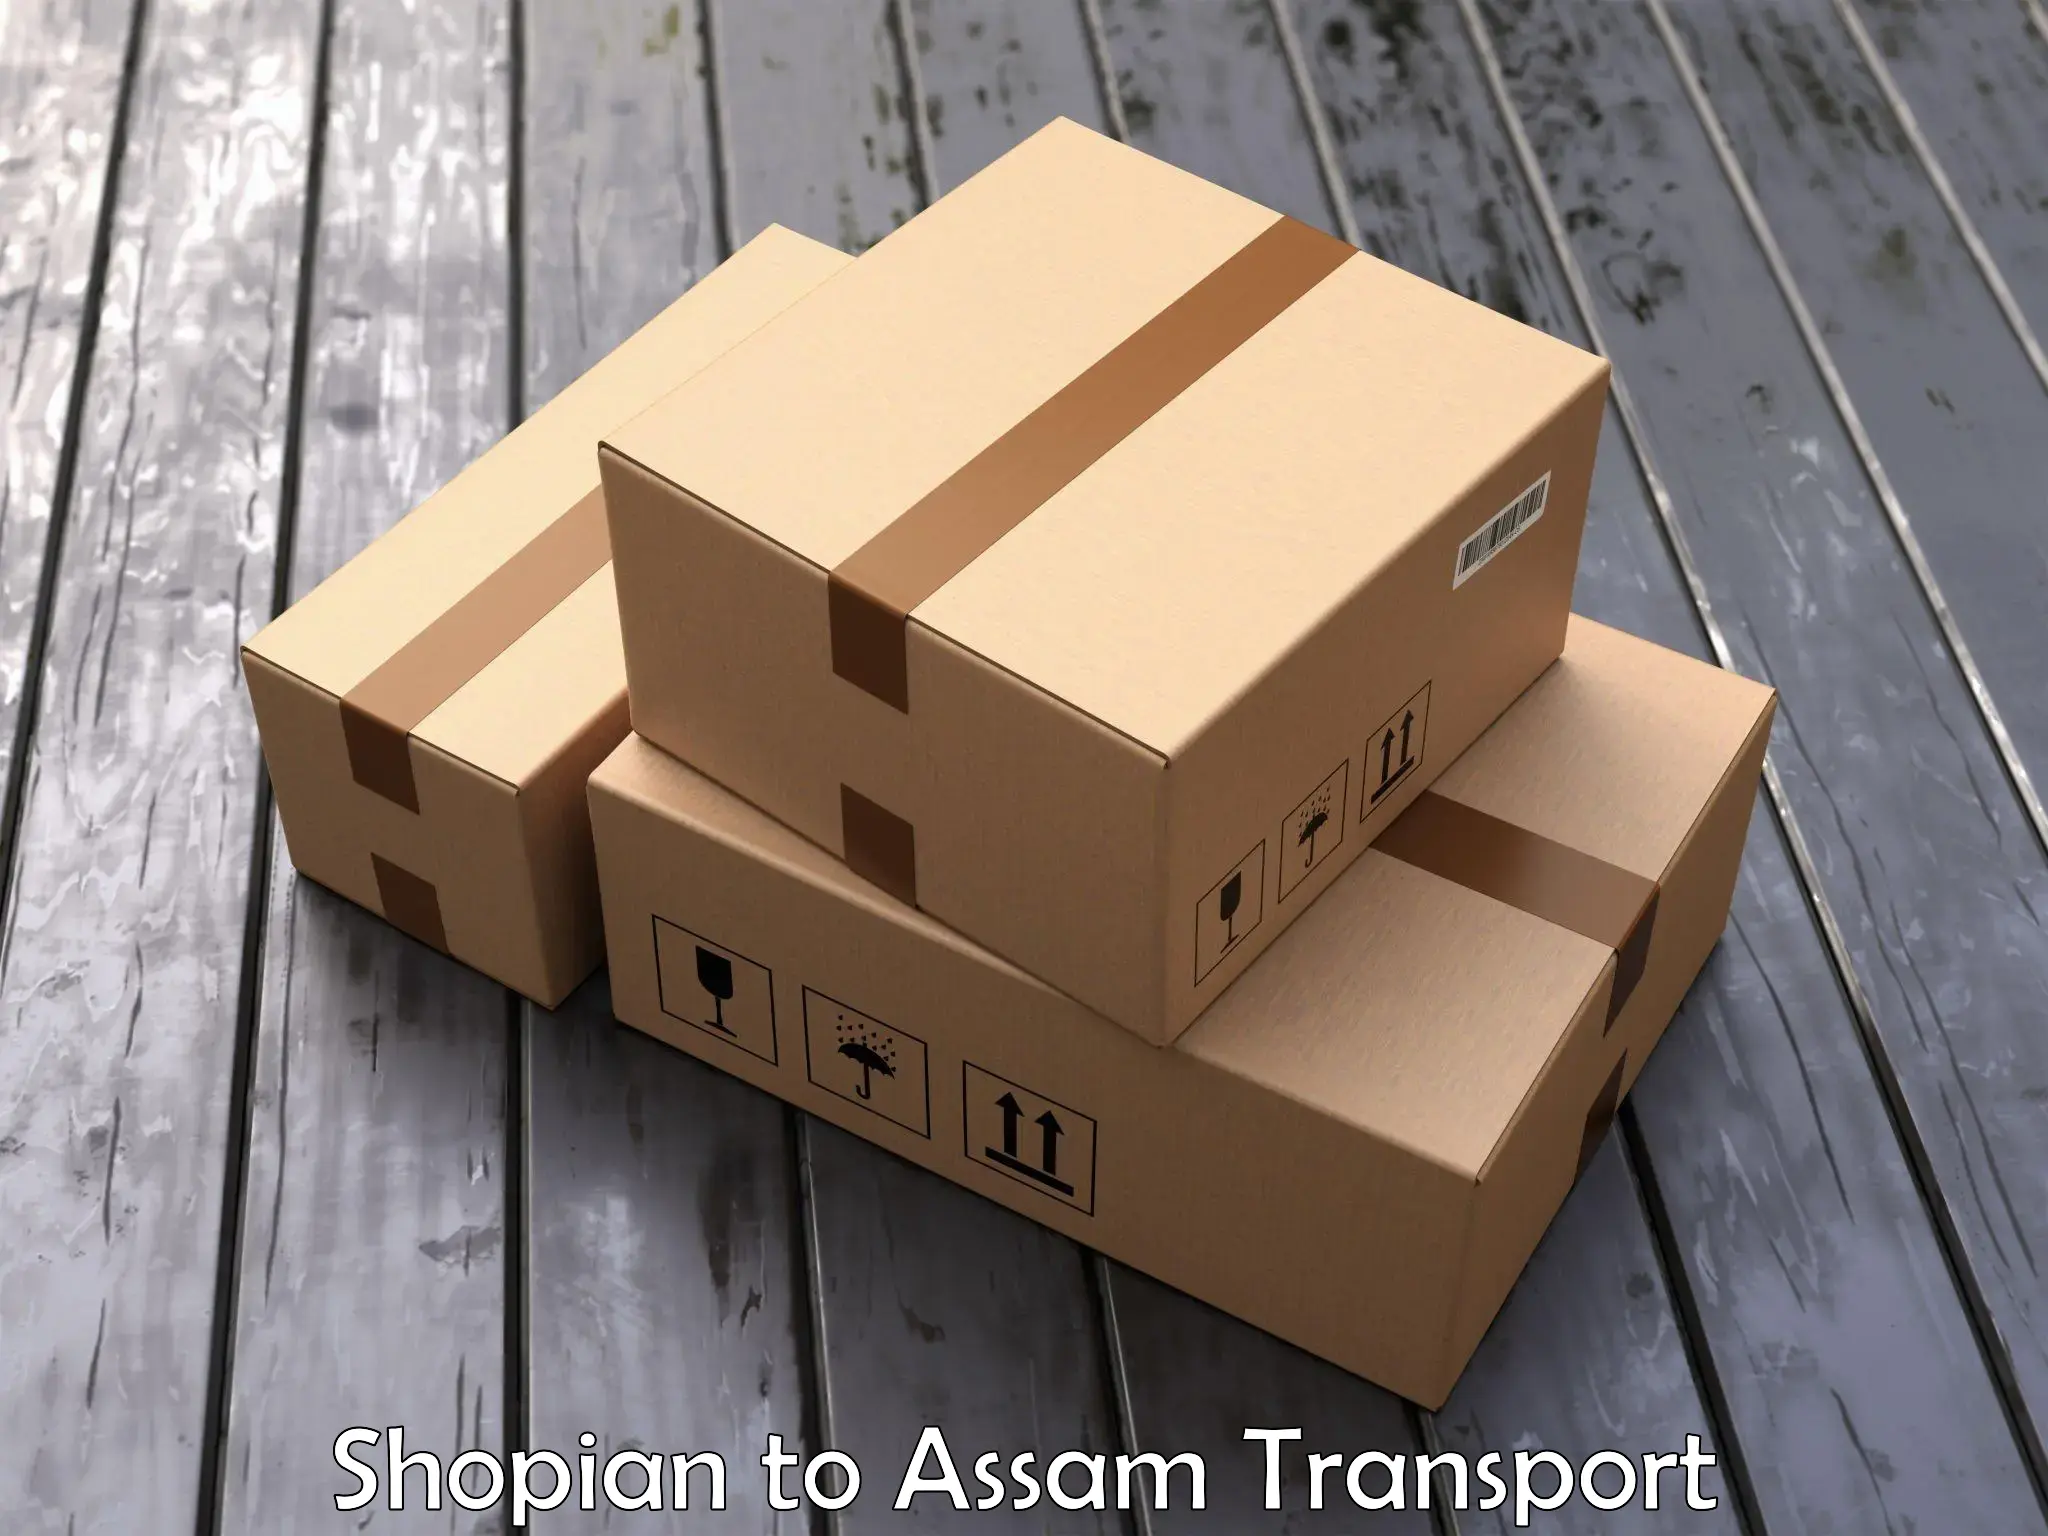 Air freight transport services Shopian to Udalguri